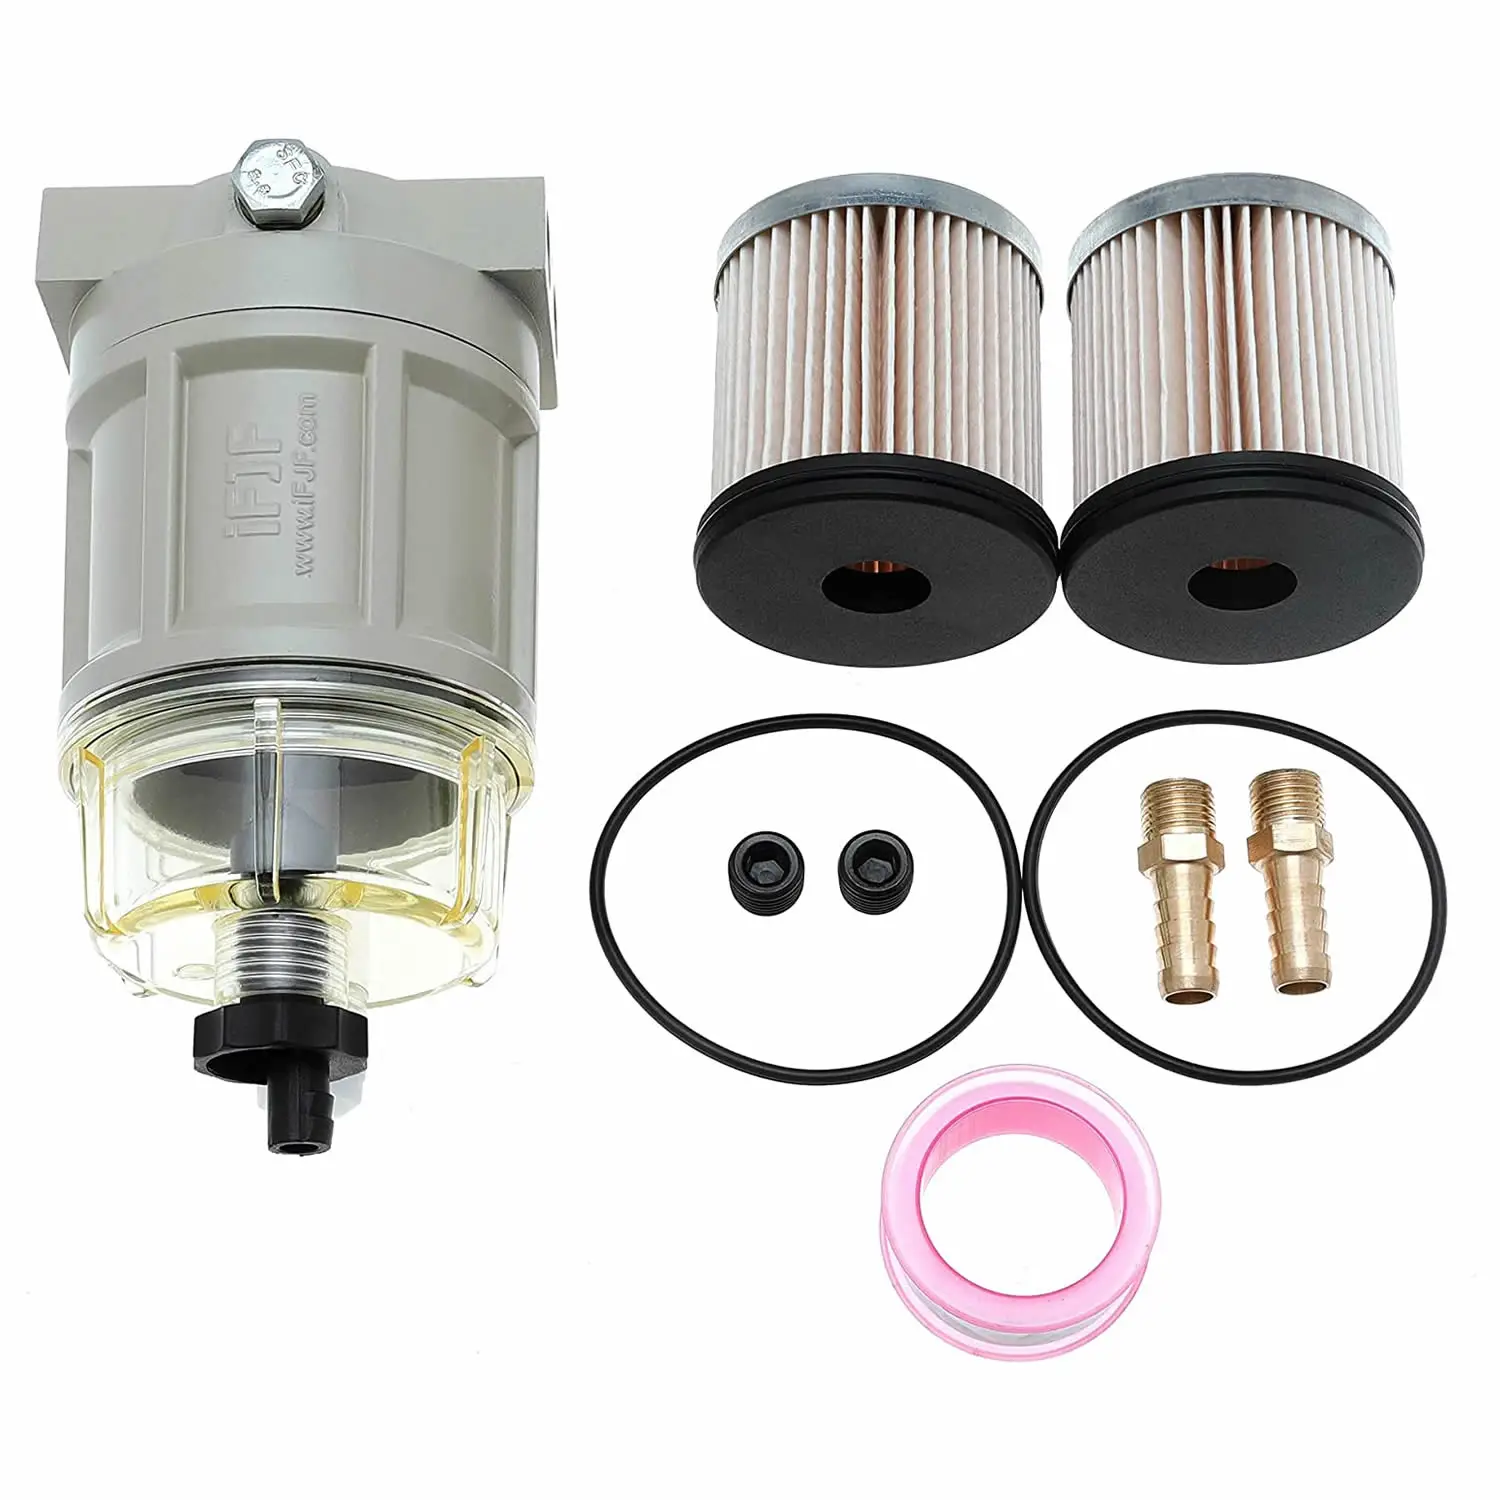 R12H (R12T Upgrade) Fuel Water Separator Marine Replaces S3240 120AT NPT ZG1/4-19 Spin-on Filter Includes 2 Fittings 2 Plugs